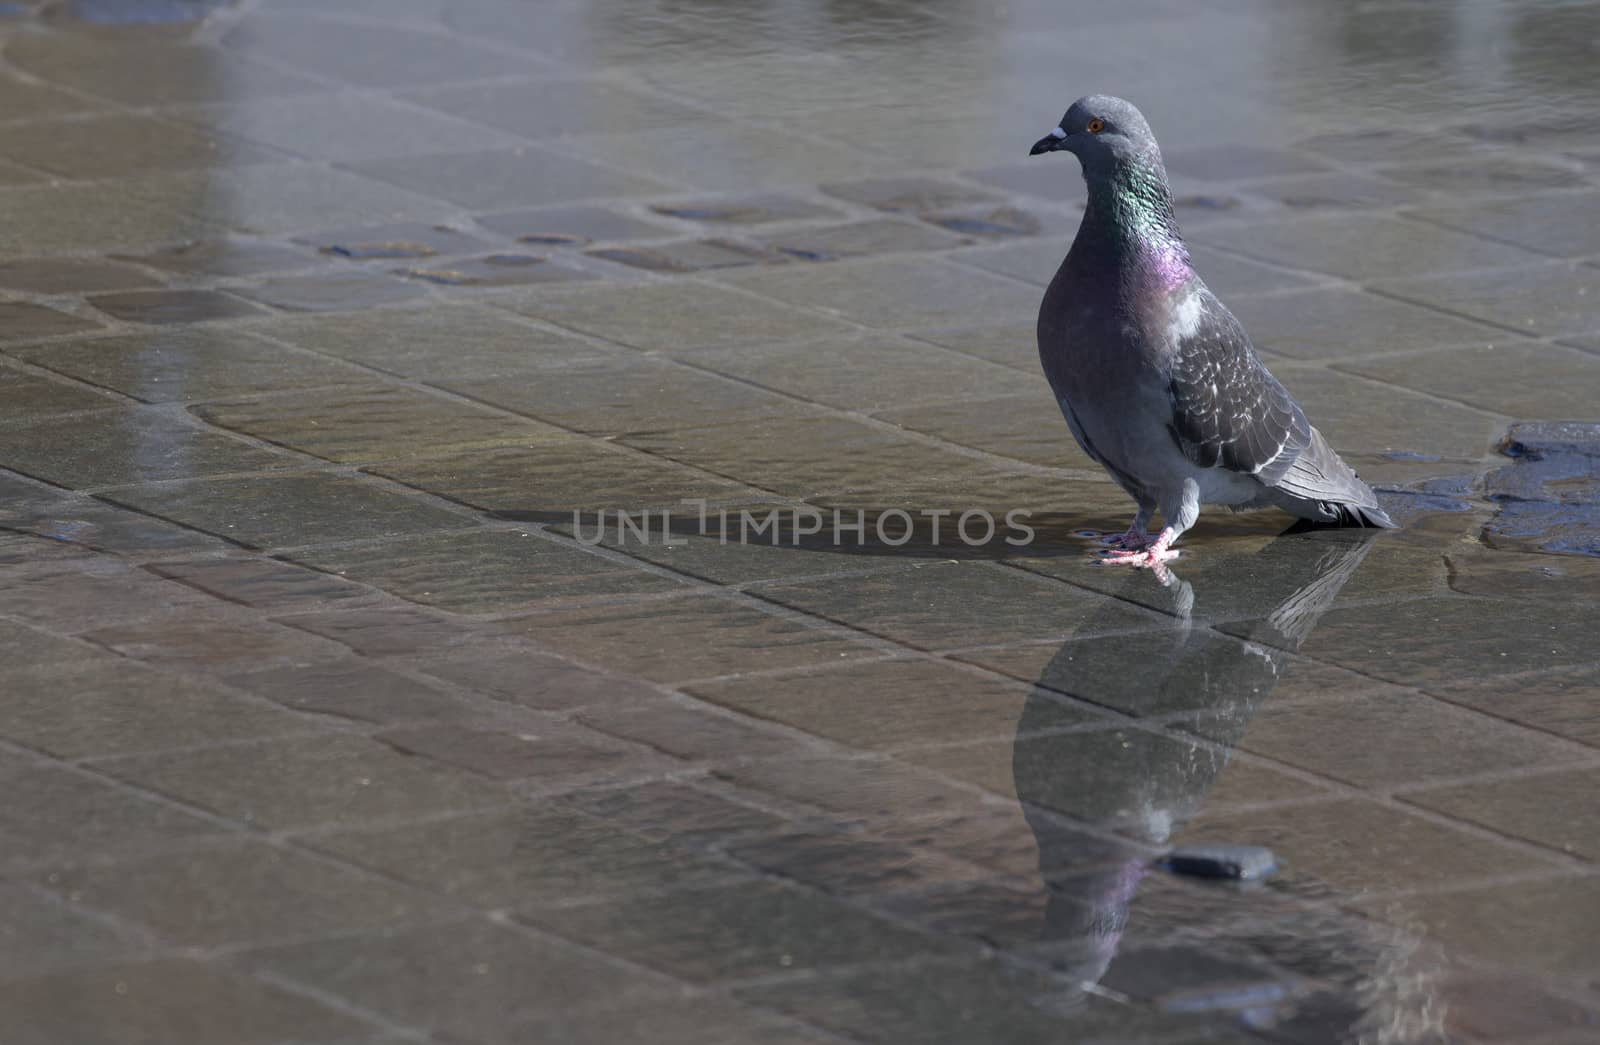 Colorful pigeon with water reflection by abarboiu